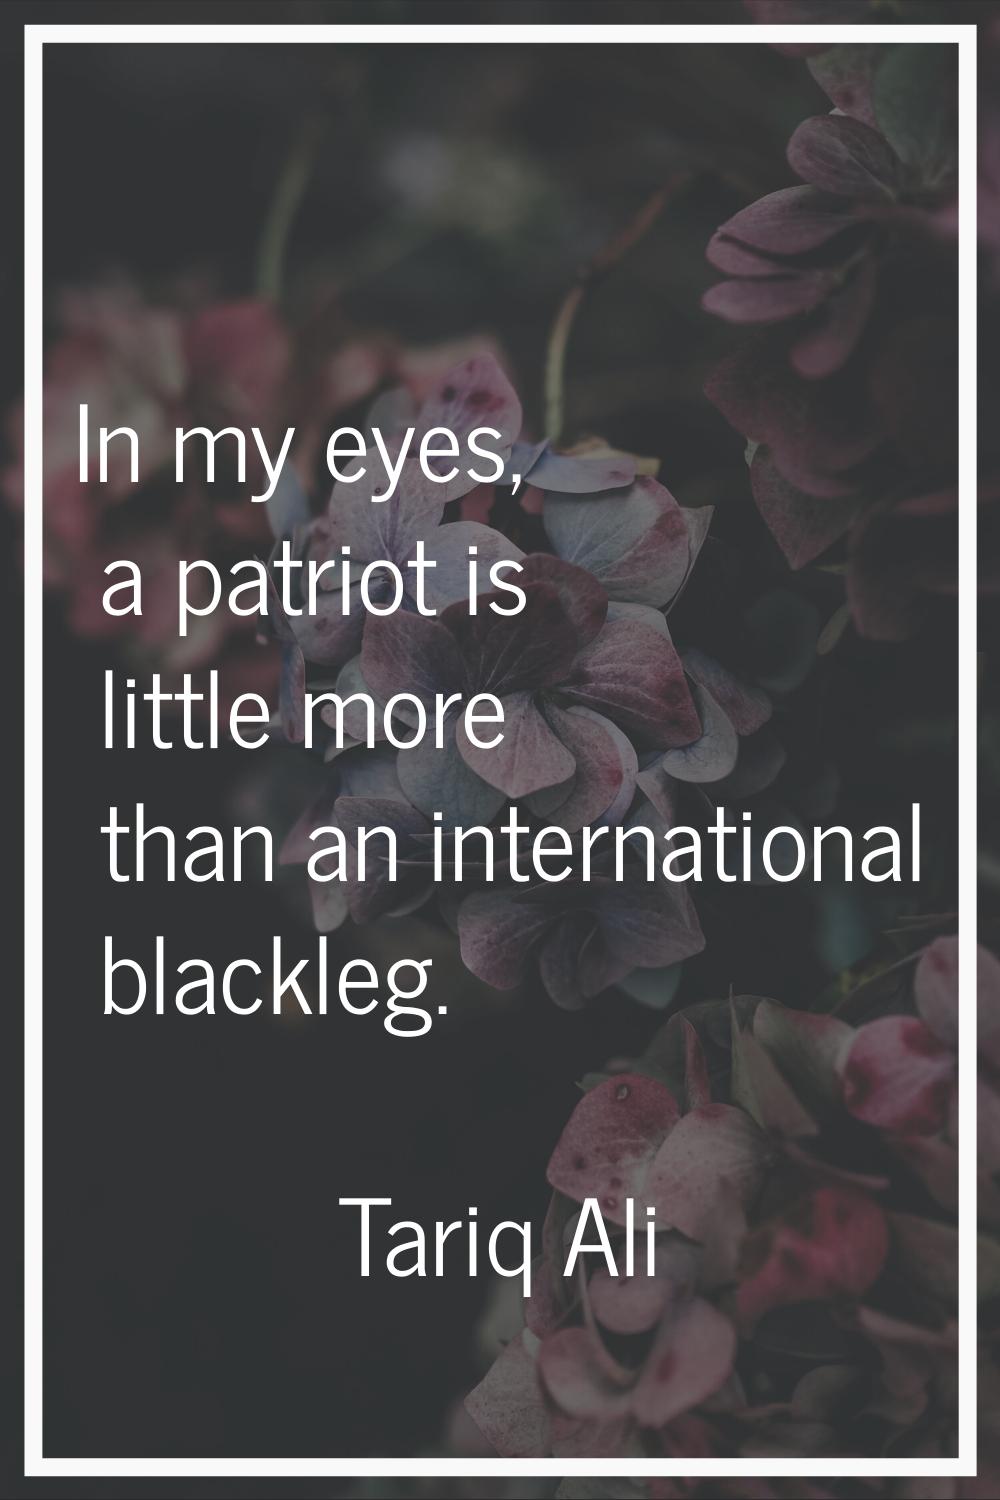 In my eyes, a patriot is little more than an international blackleg.